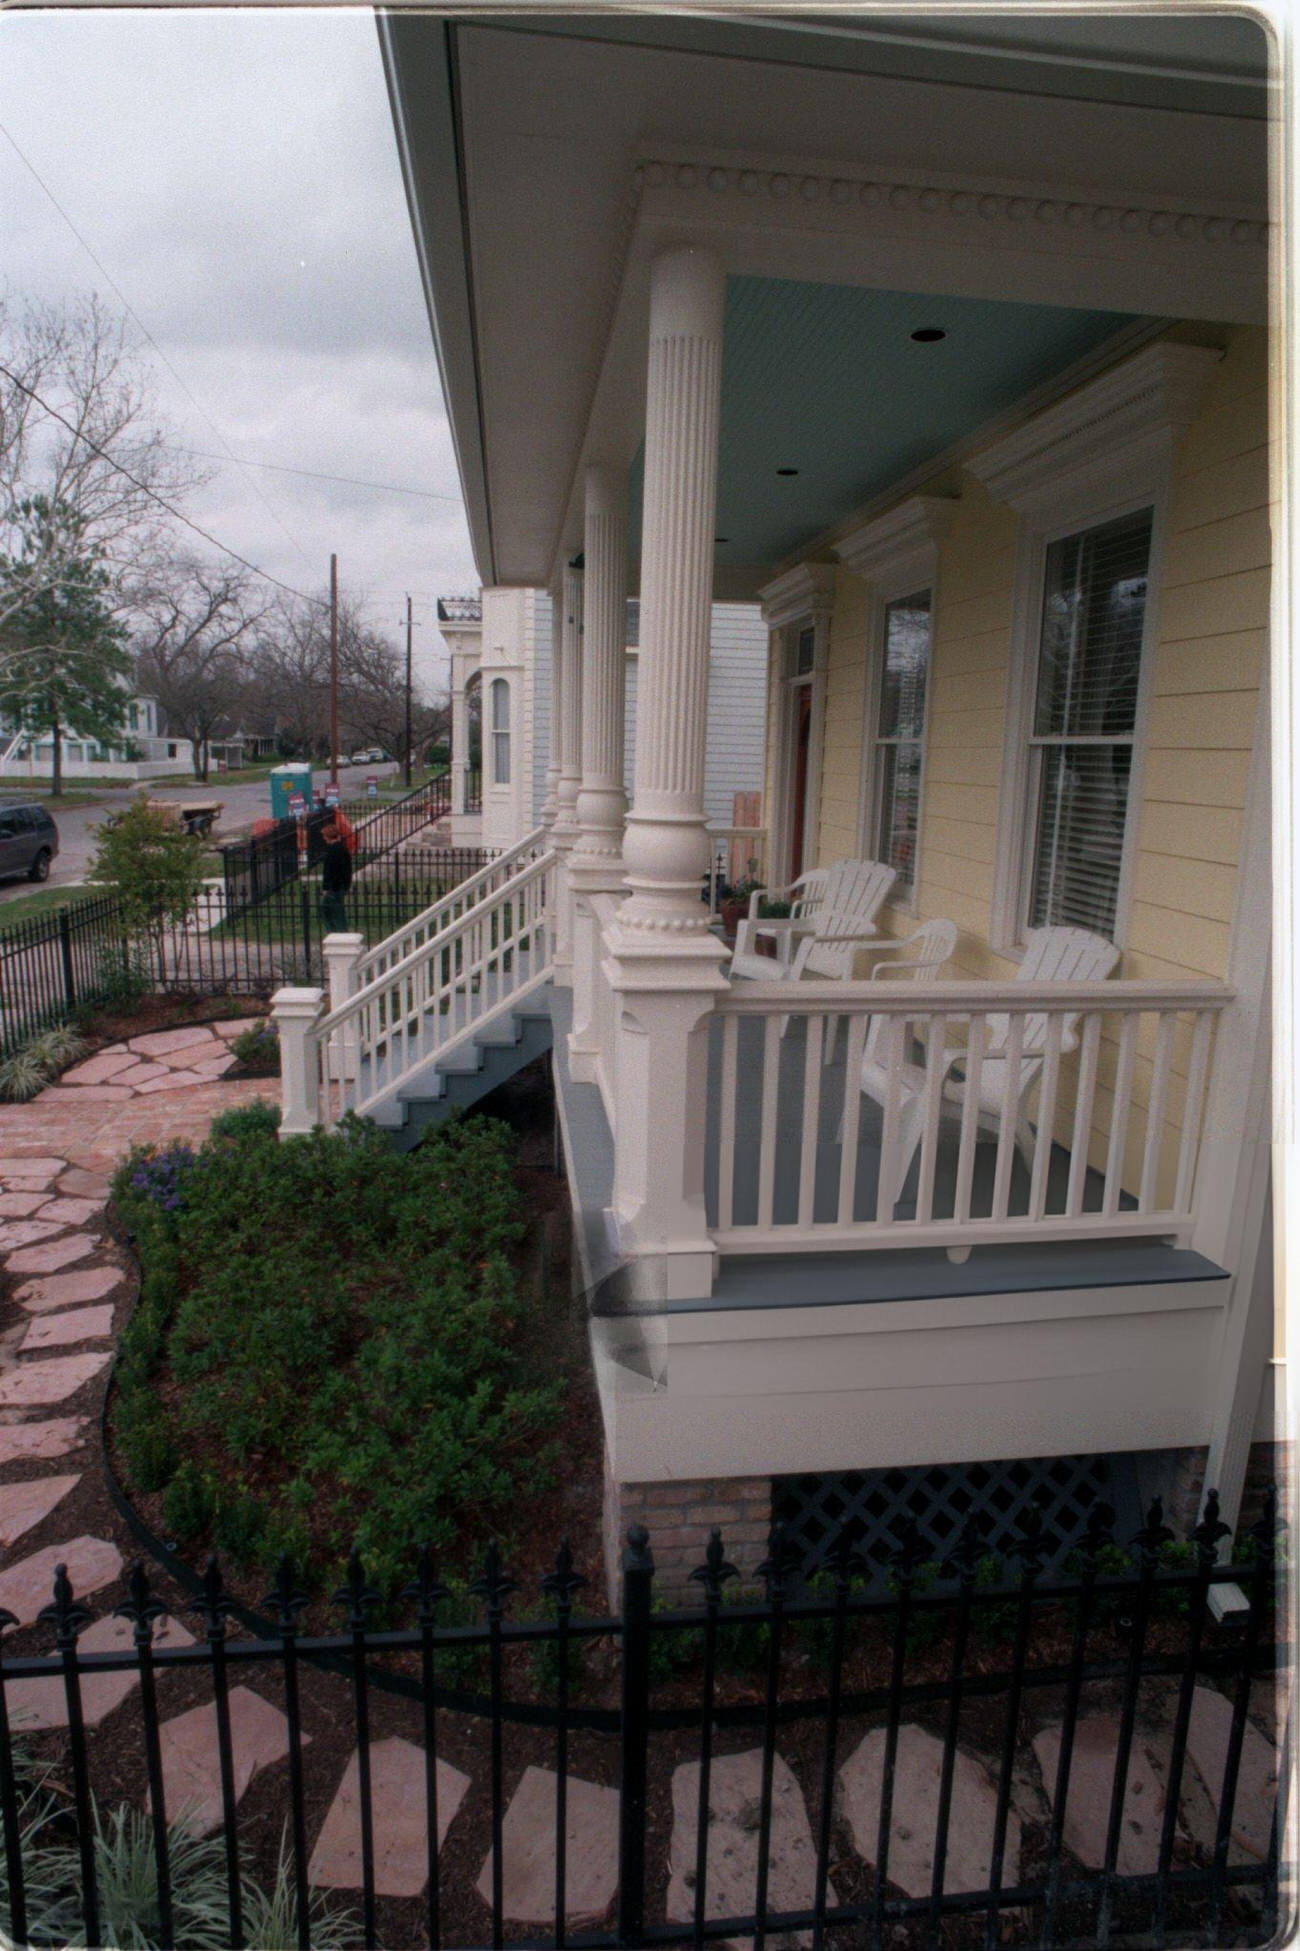 Home construction showcases wicker furniture and iron fence in the Houston Heights with rising median prices, 1998.